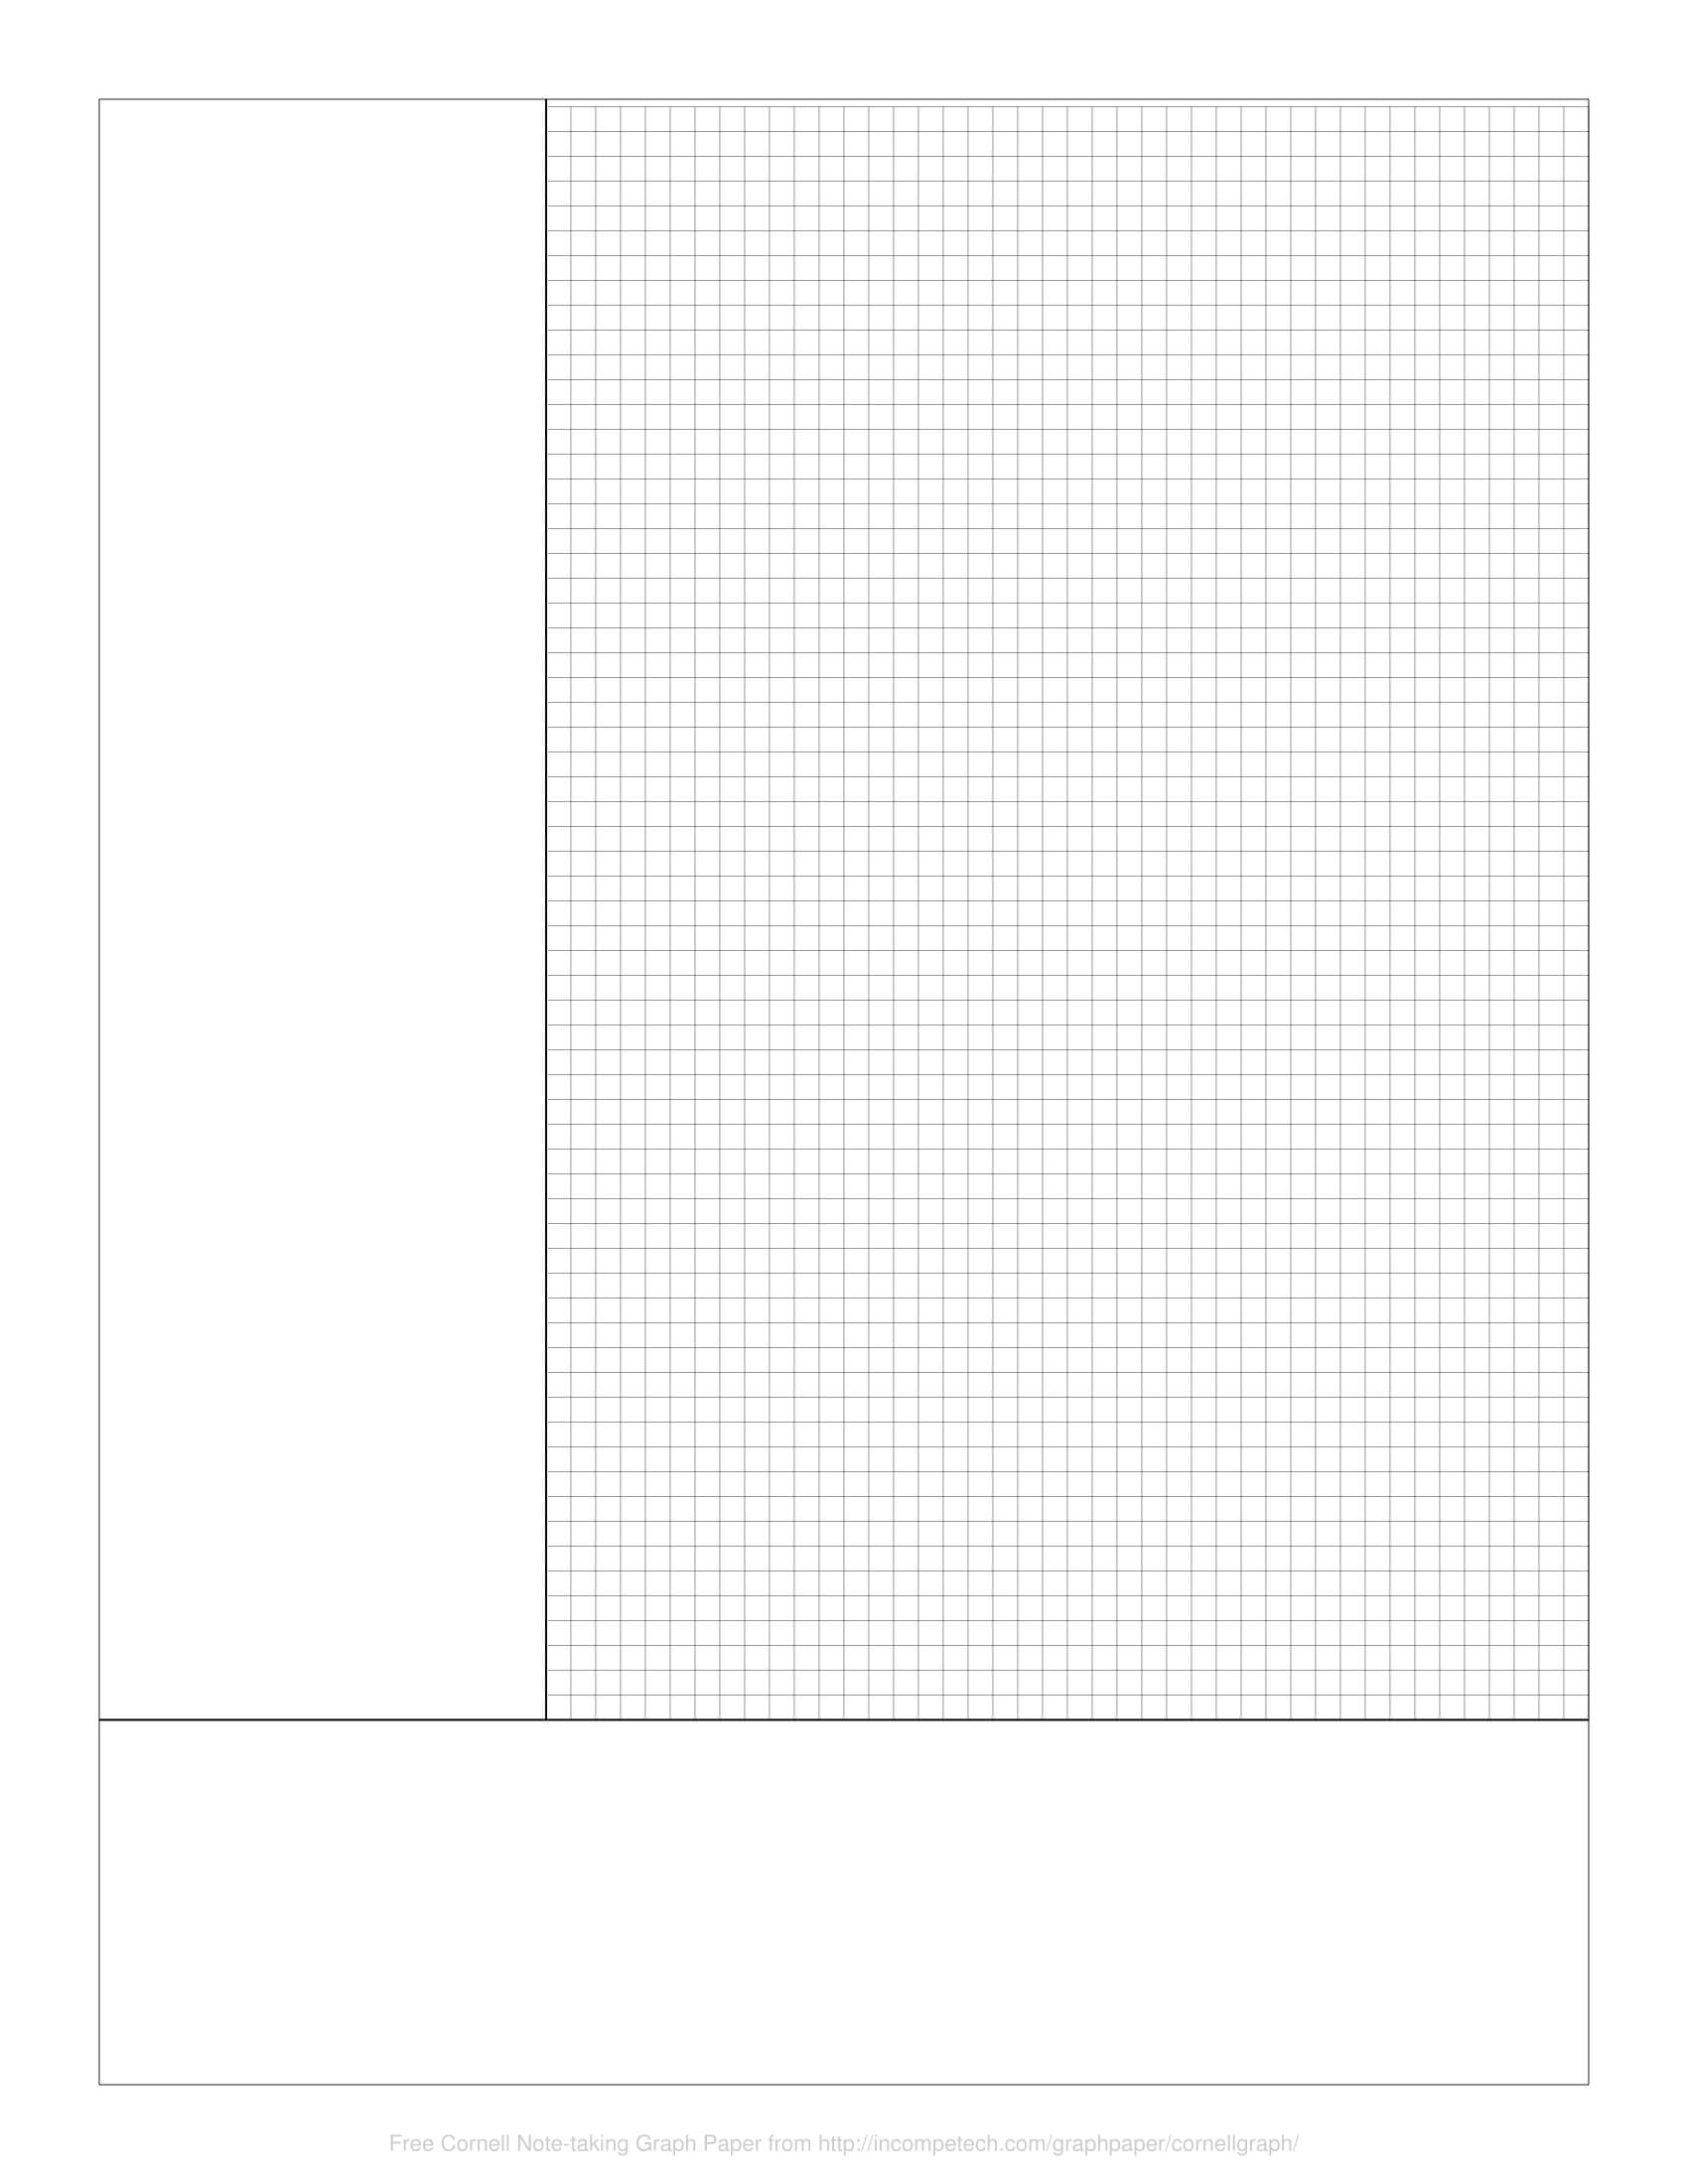 Free Online Graph Paper / Cornell Note Taking Graph Pertaining To Avid Cornell Note Template